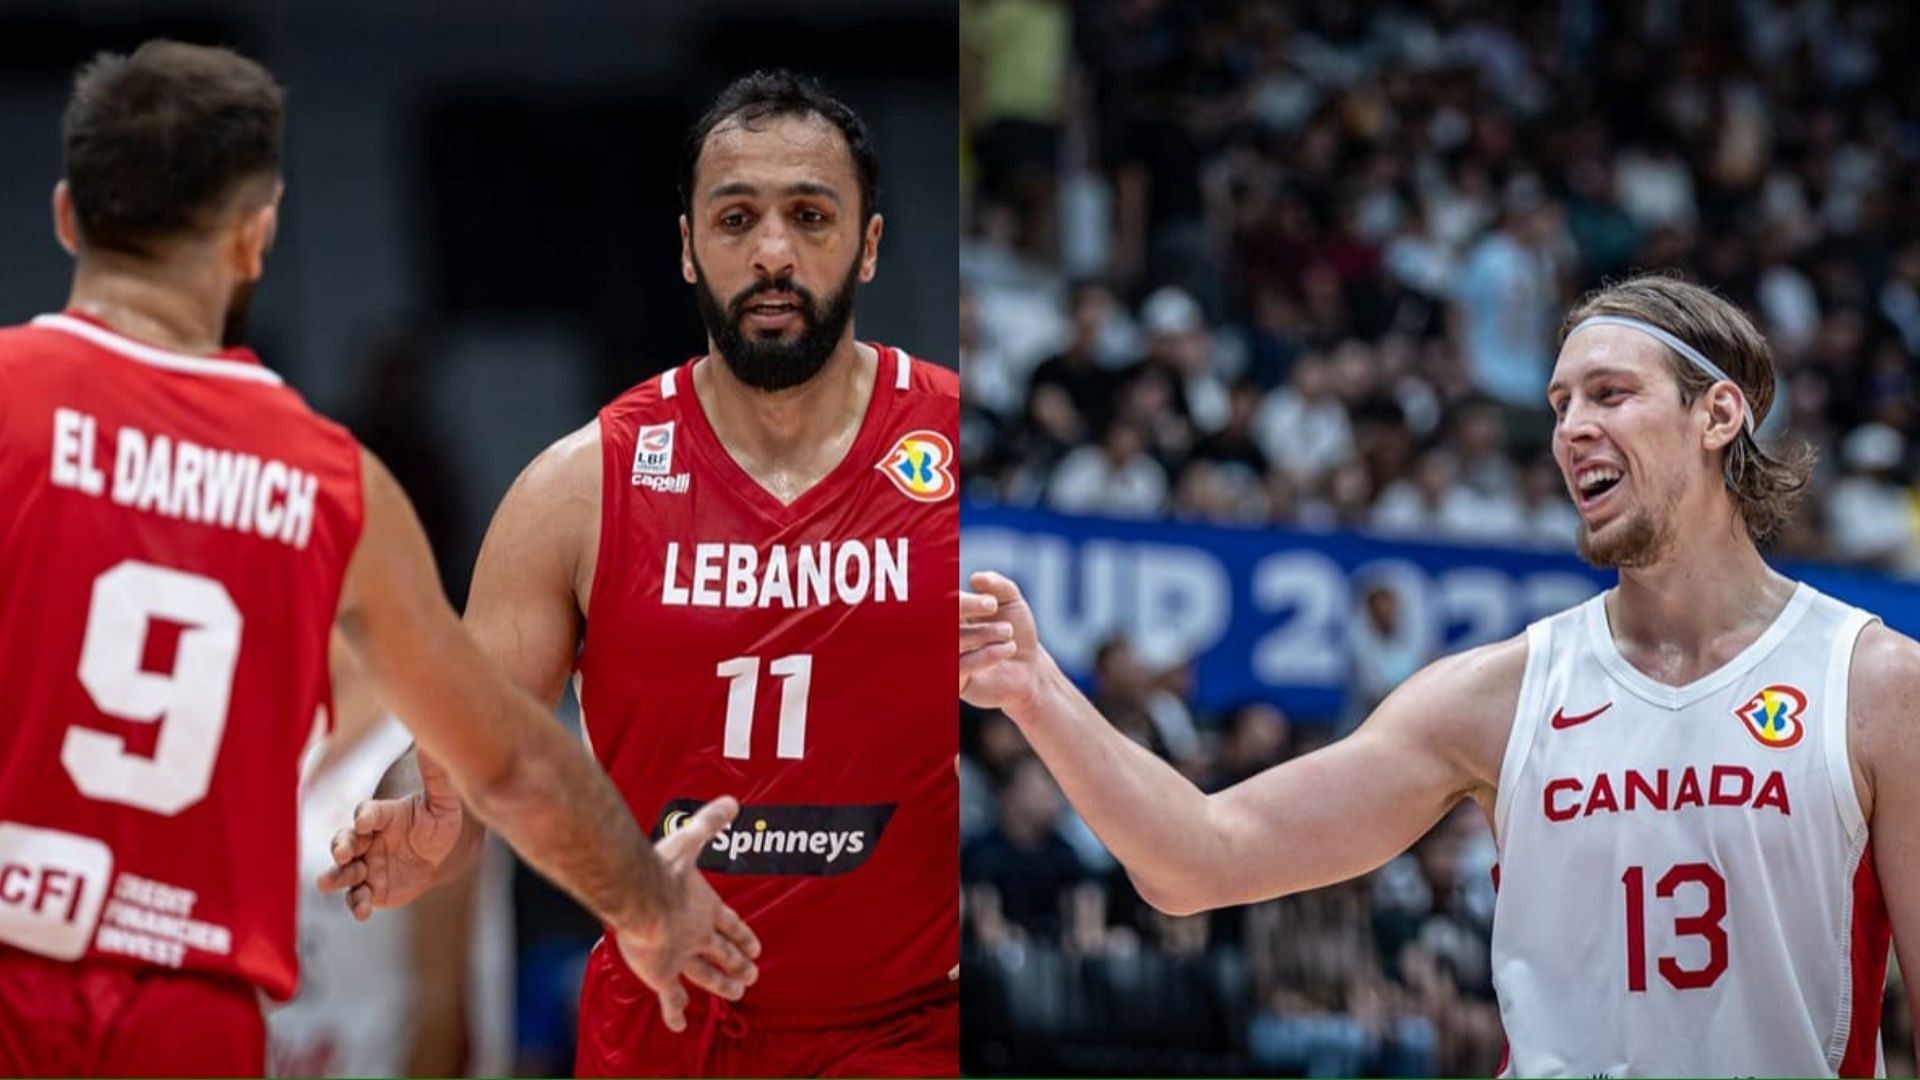 Lebanon vs Canada FIBA World Cup 2023 Date, time, where to watch, live stream details, and more